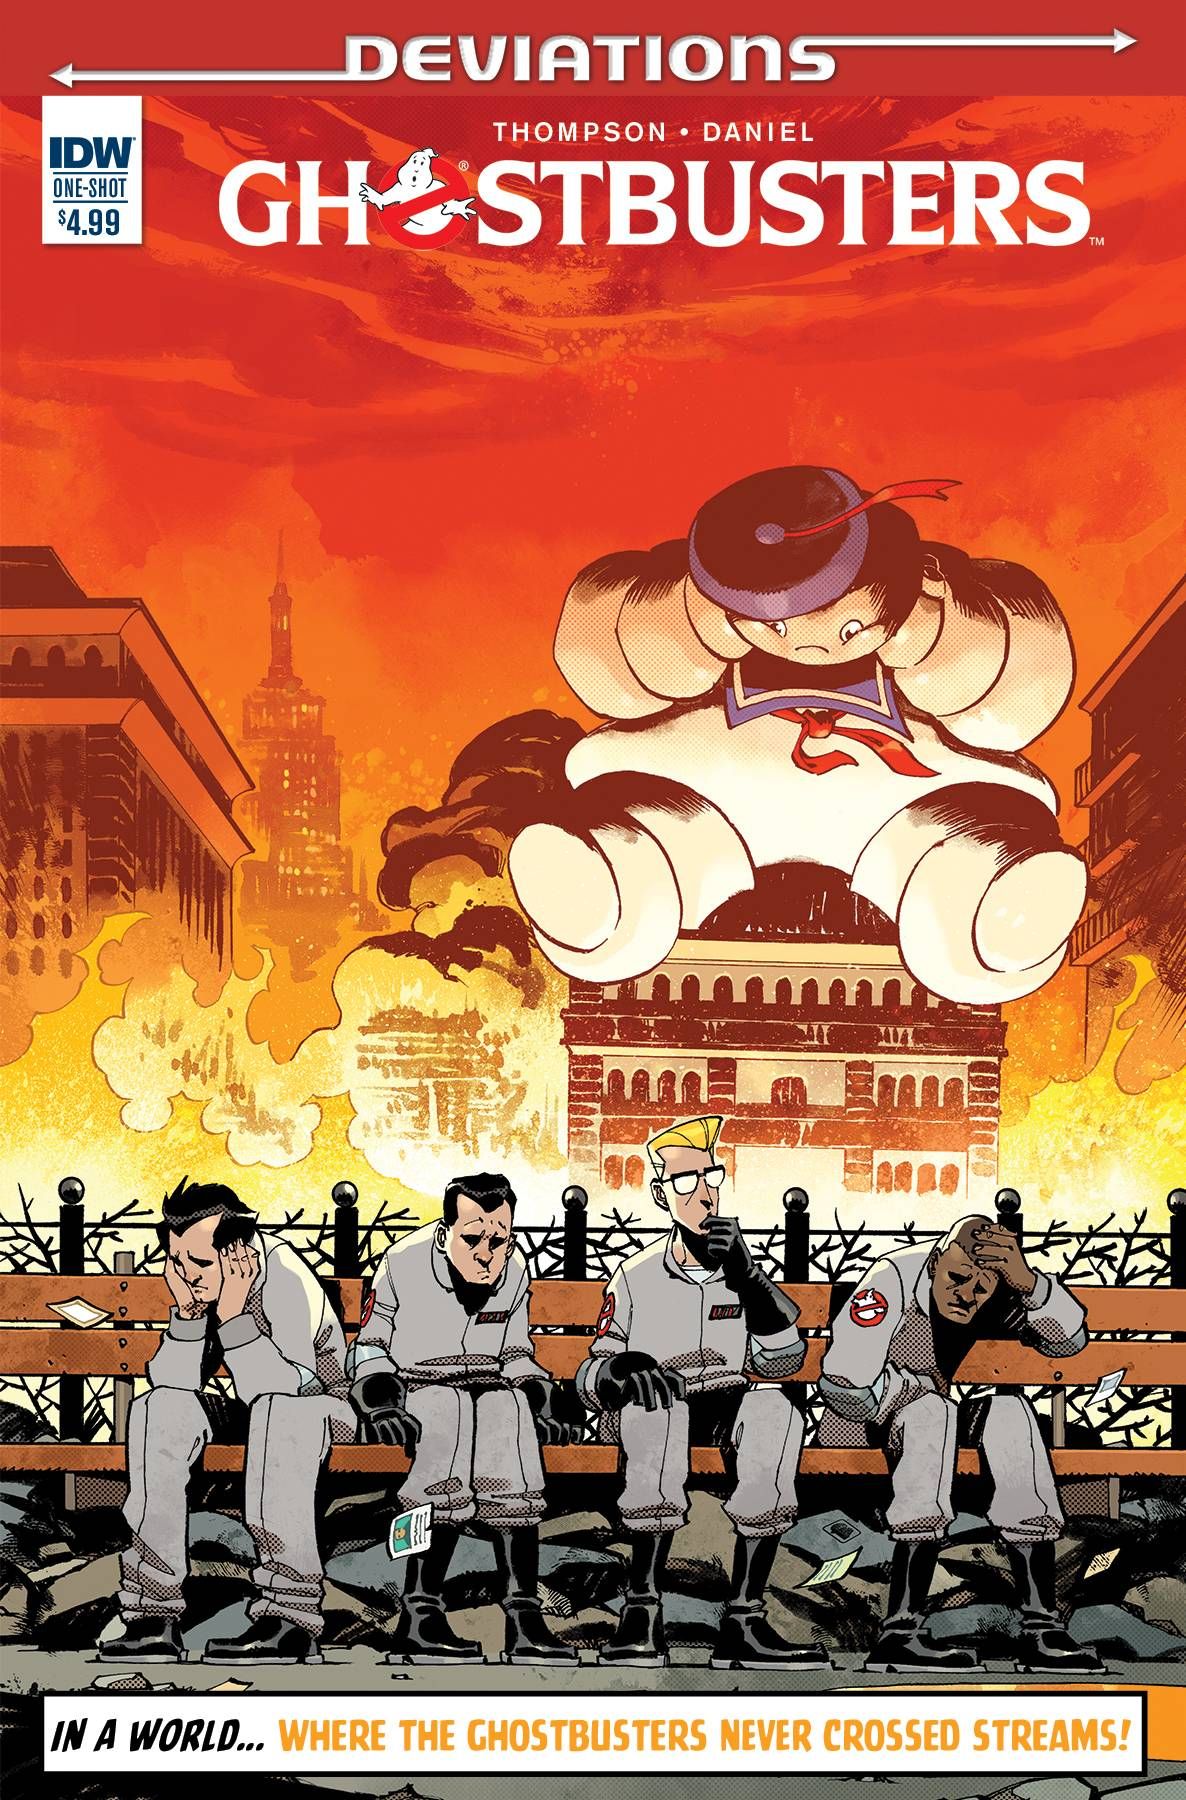 Ghostbusters: Deviations #1 Comic